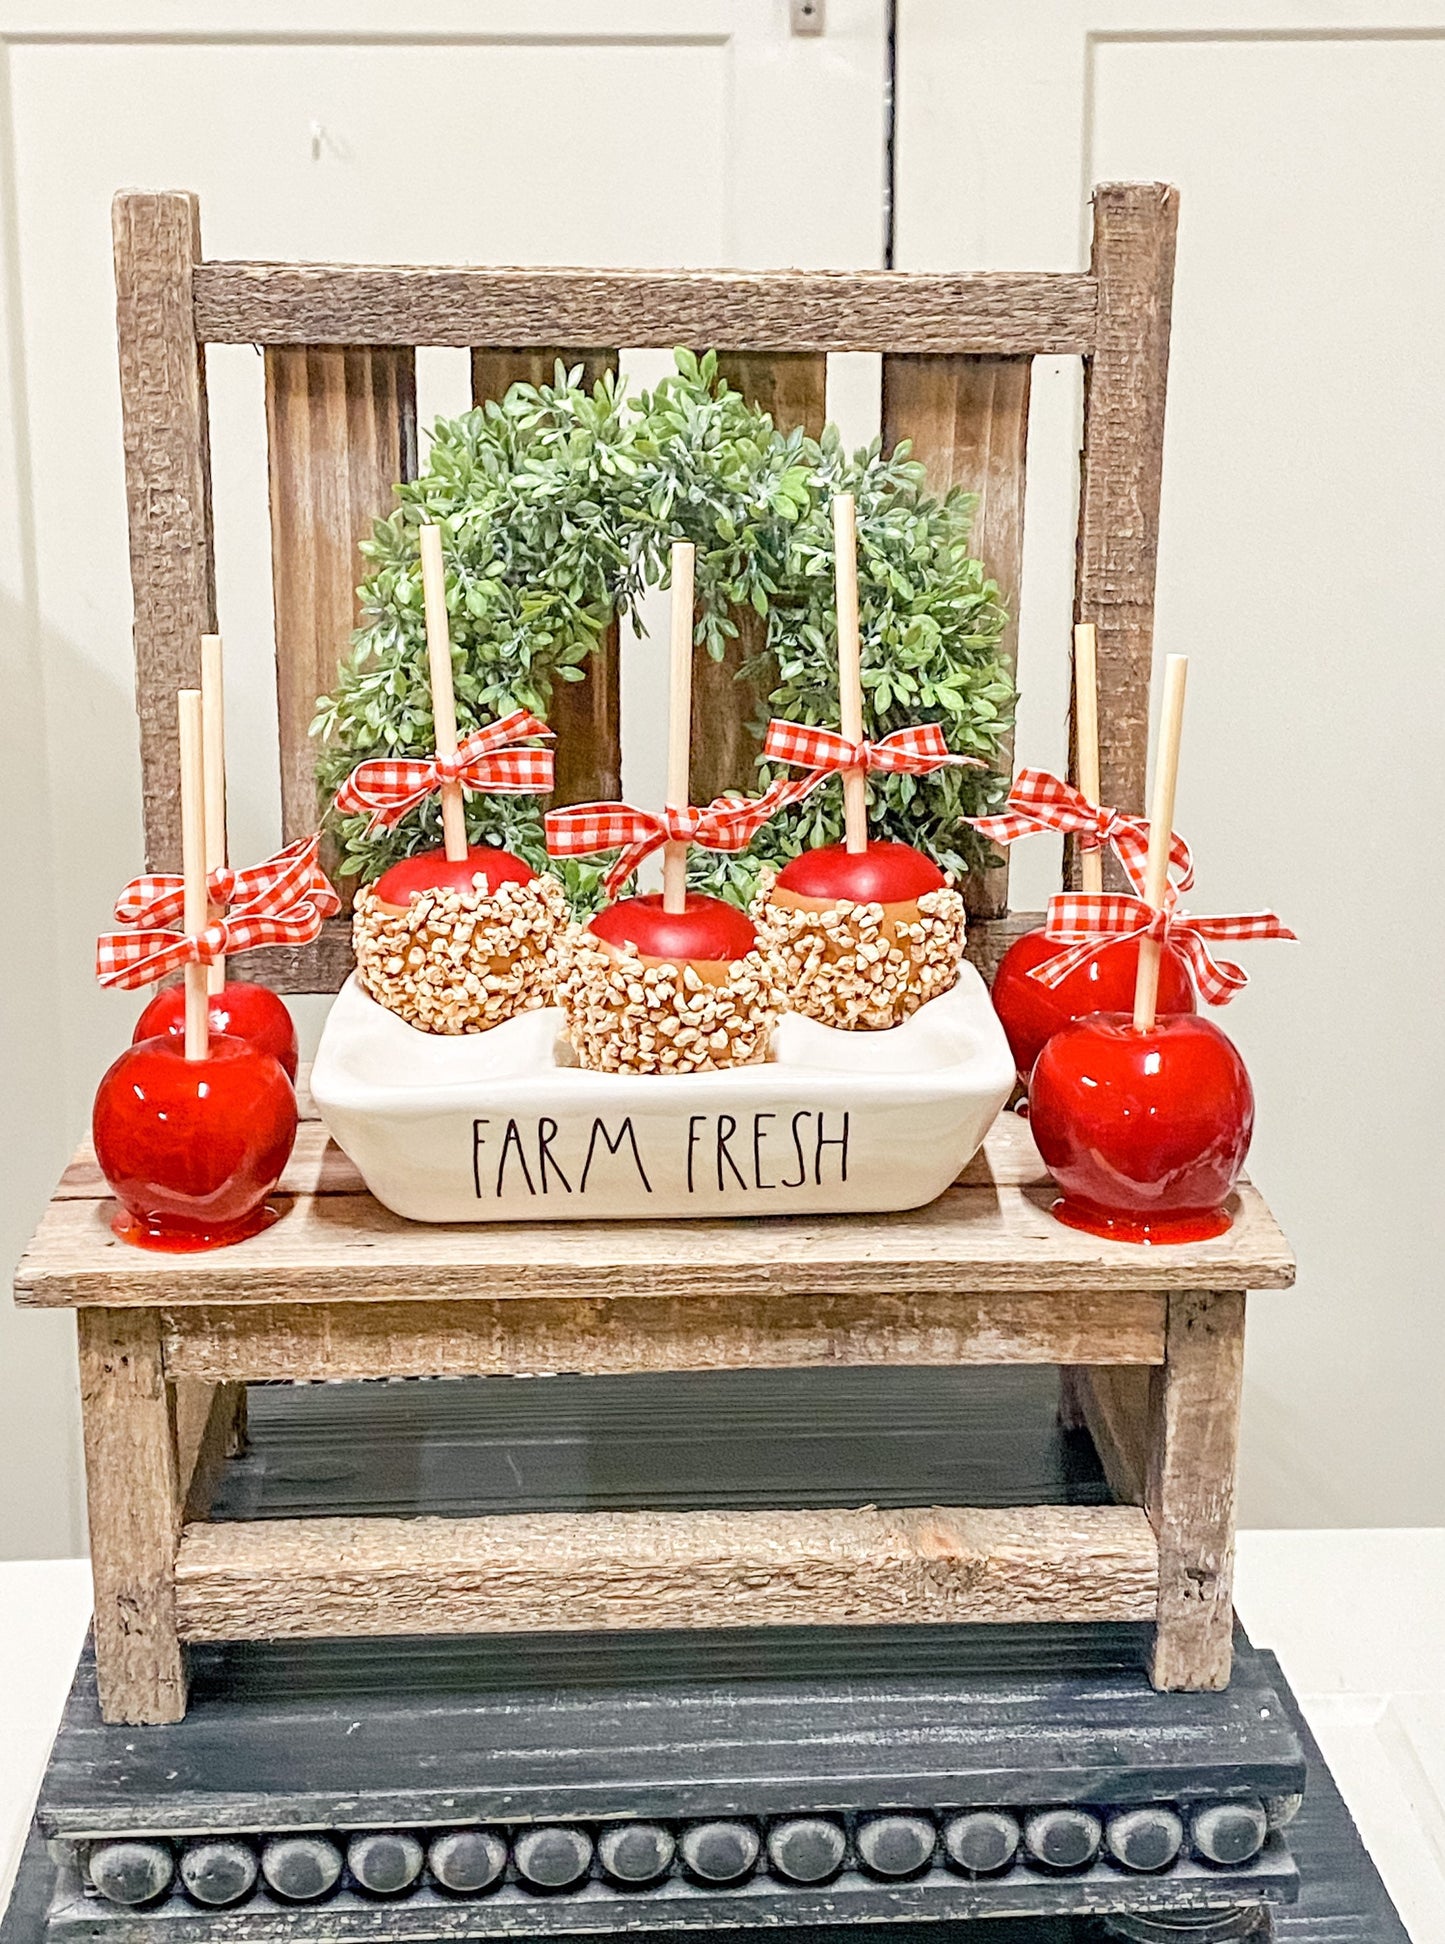 Caramel Apple,fresh apples, apples decor, tiered tray size, candy apples, caramel apples